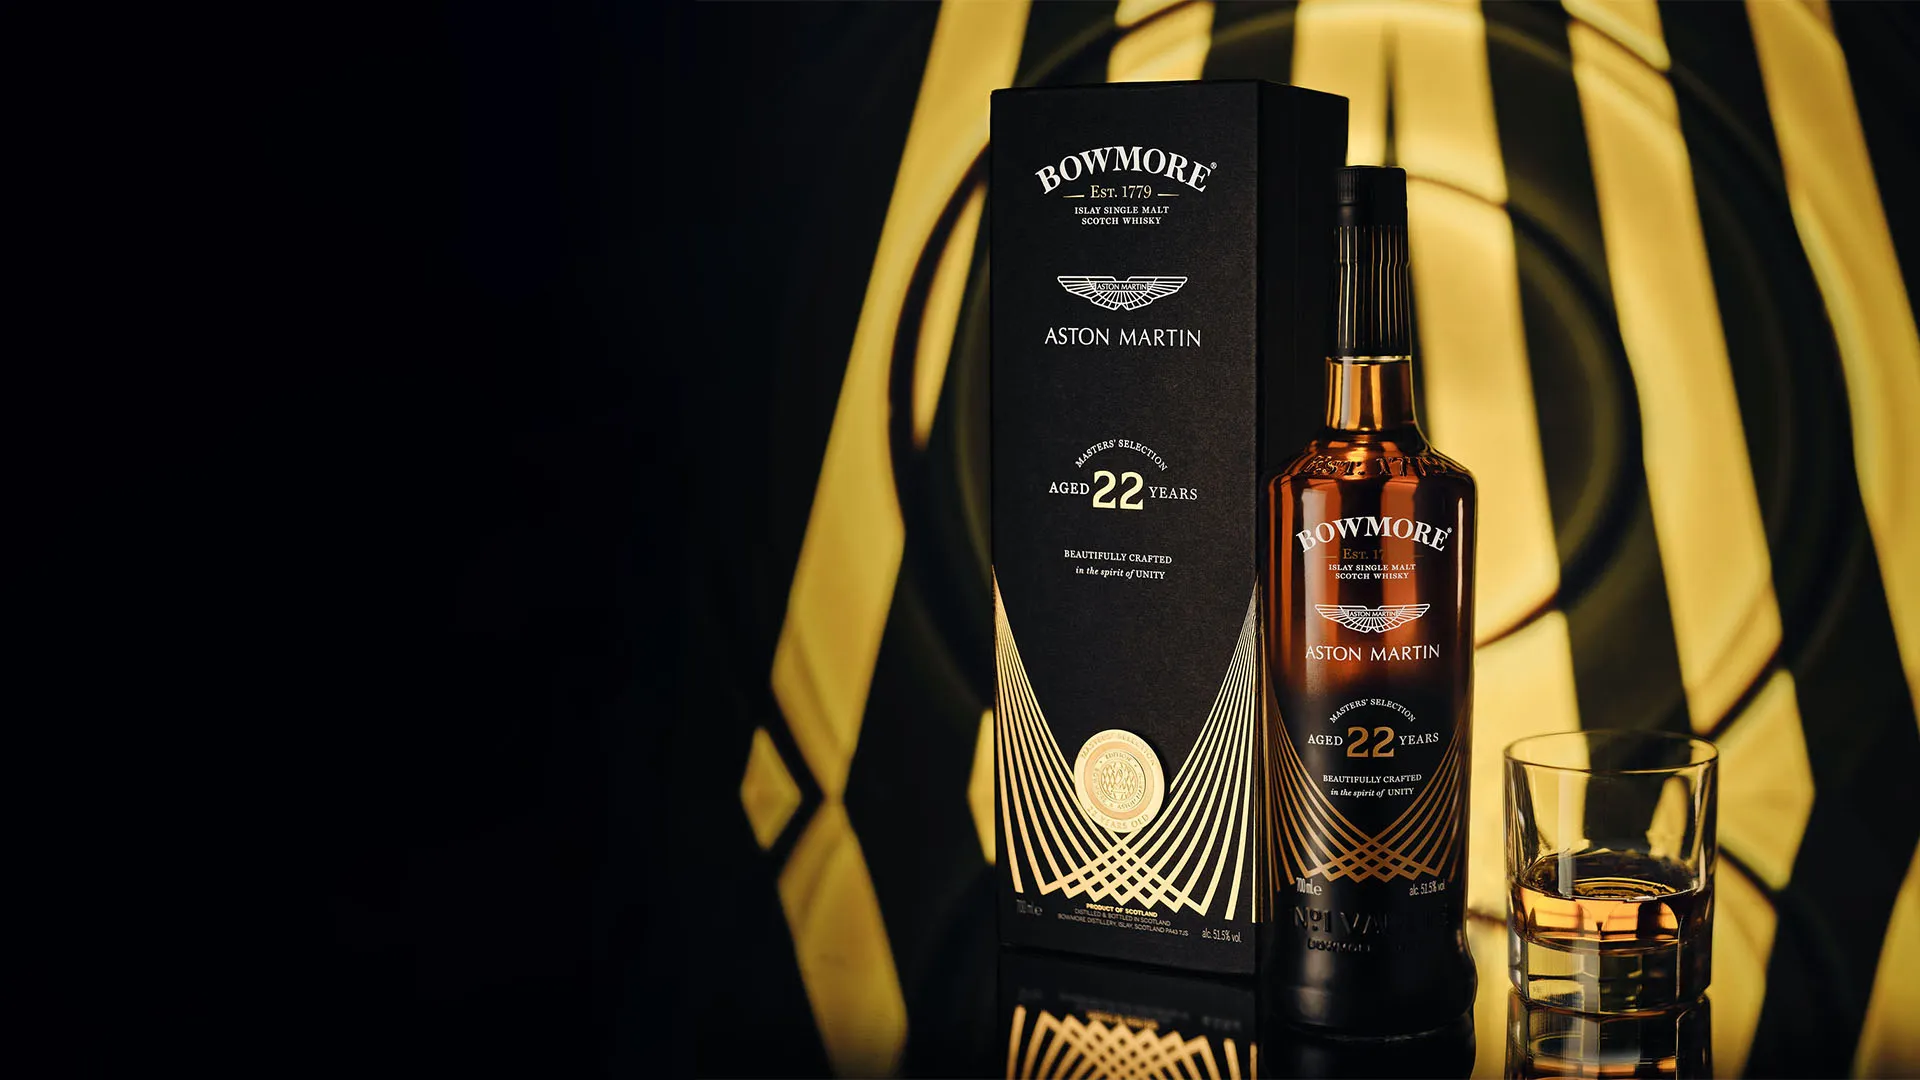 bowmore and aston martin masters reunite for the introduction of masters selection 22 year old single malt scotch whisky